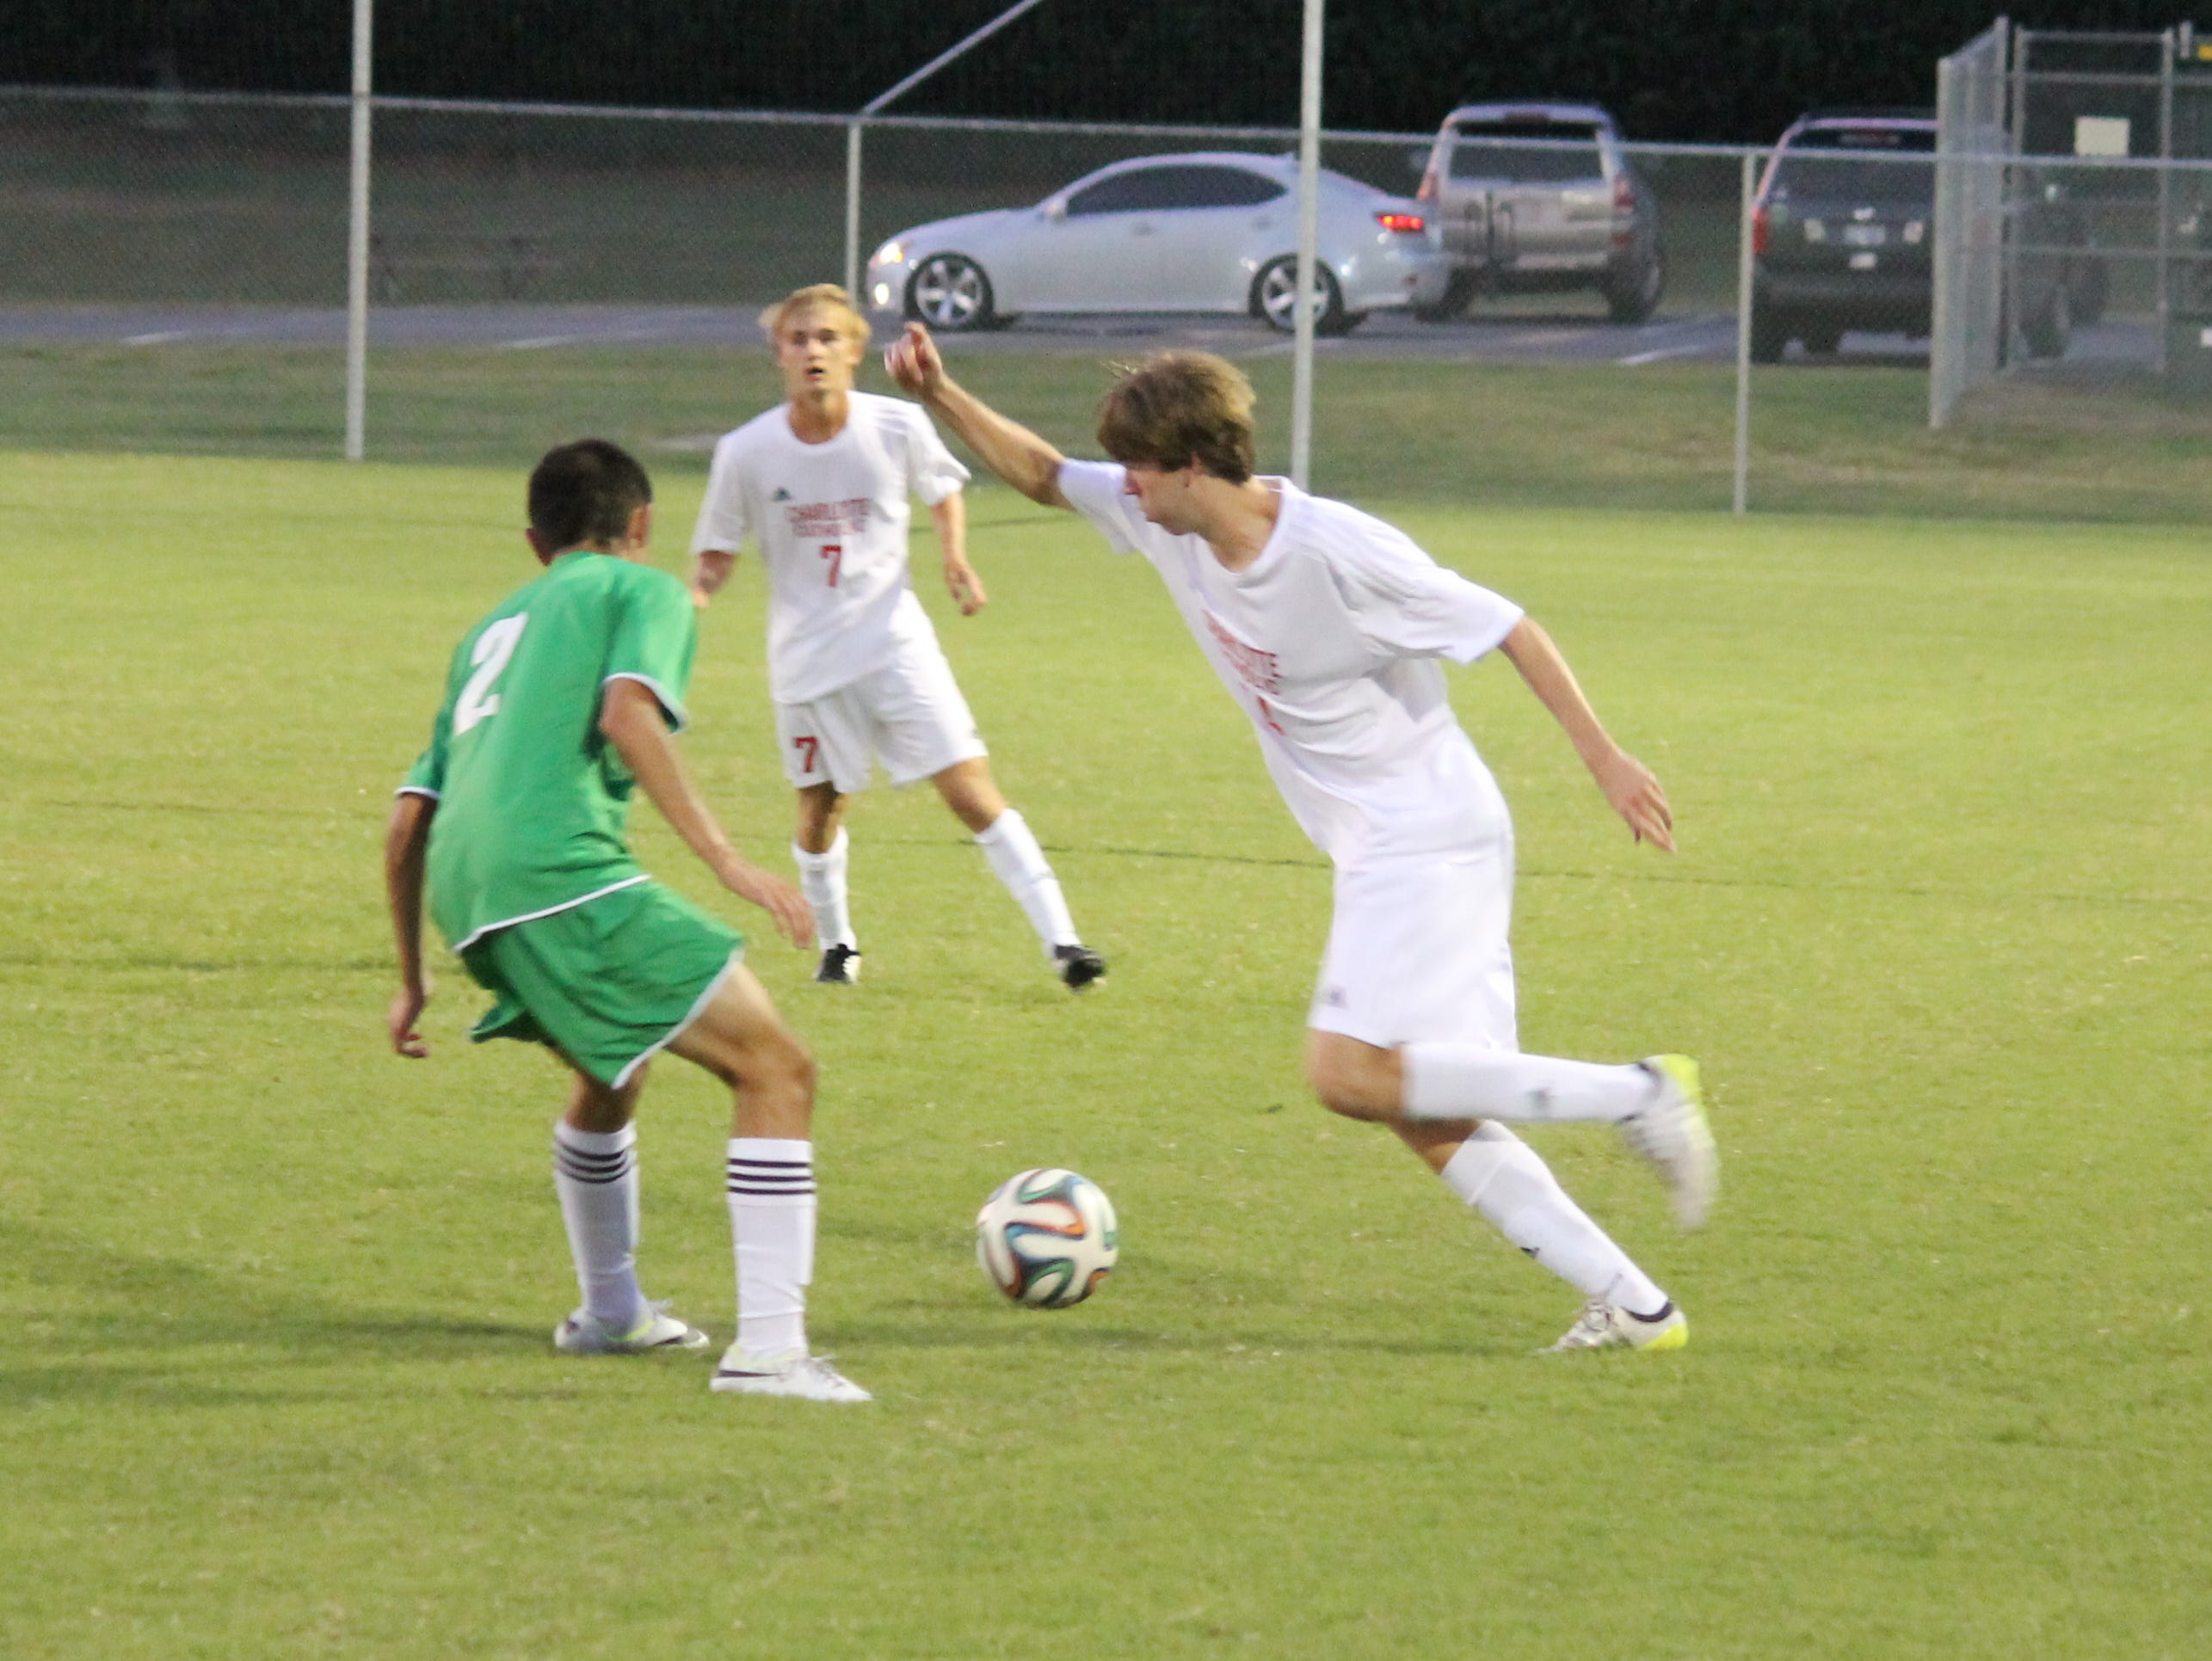 Charlotte Catholic scored two second-half goals to defeat Ardrey Kell 3-1.